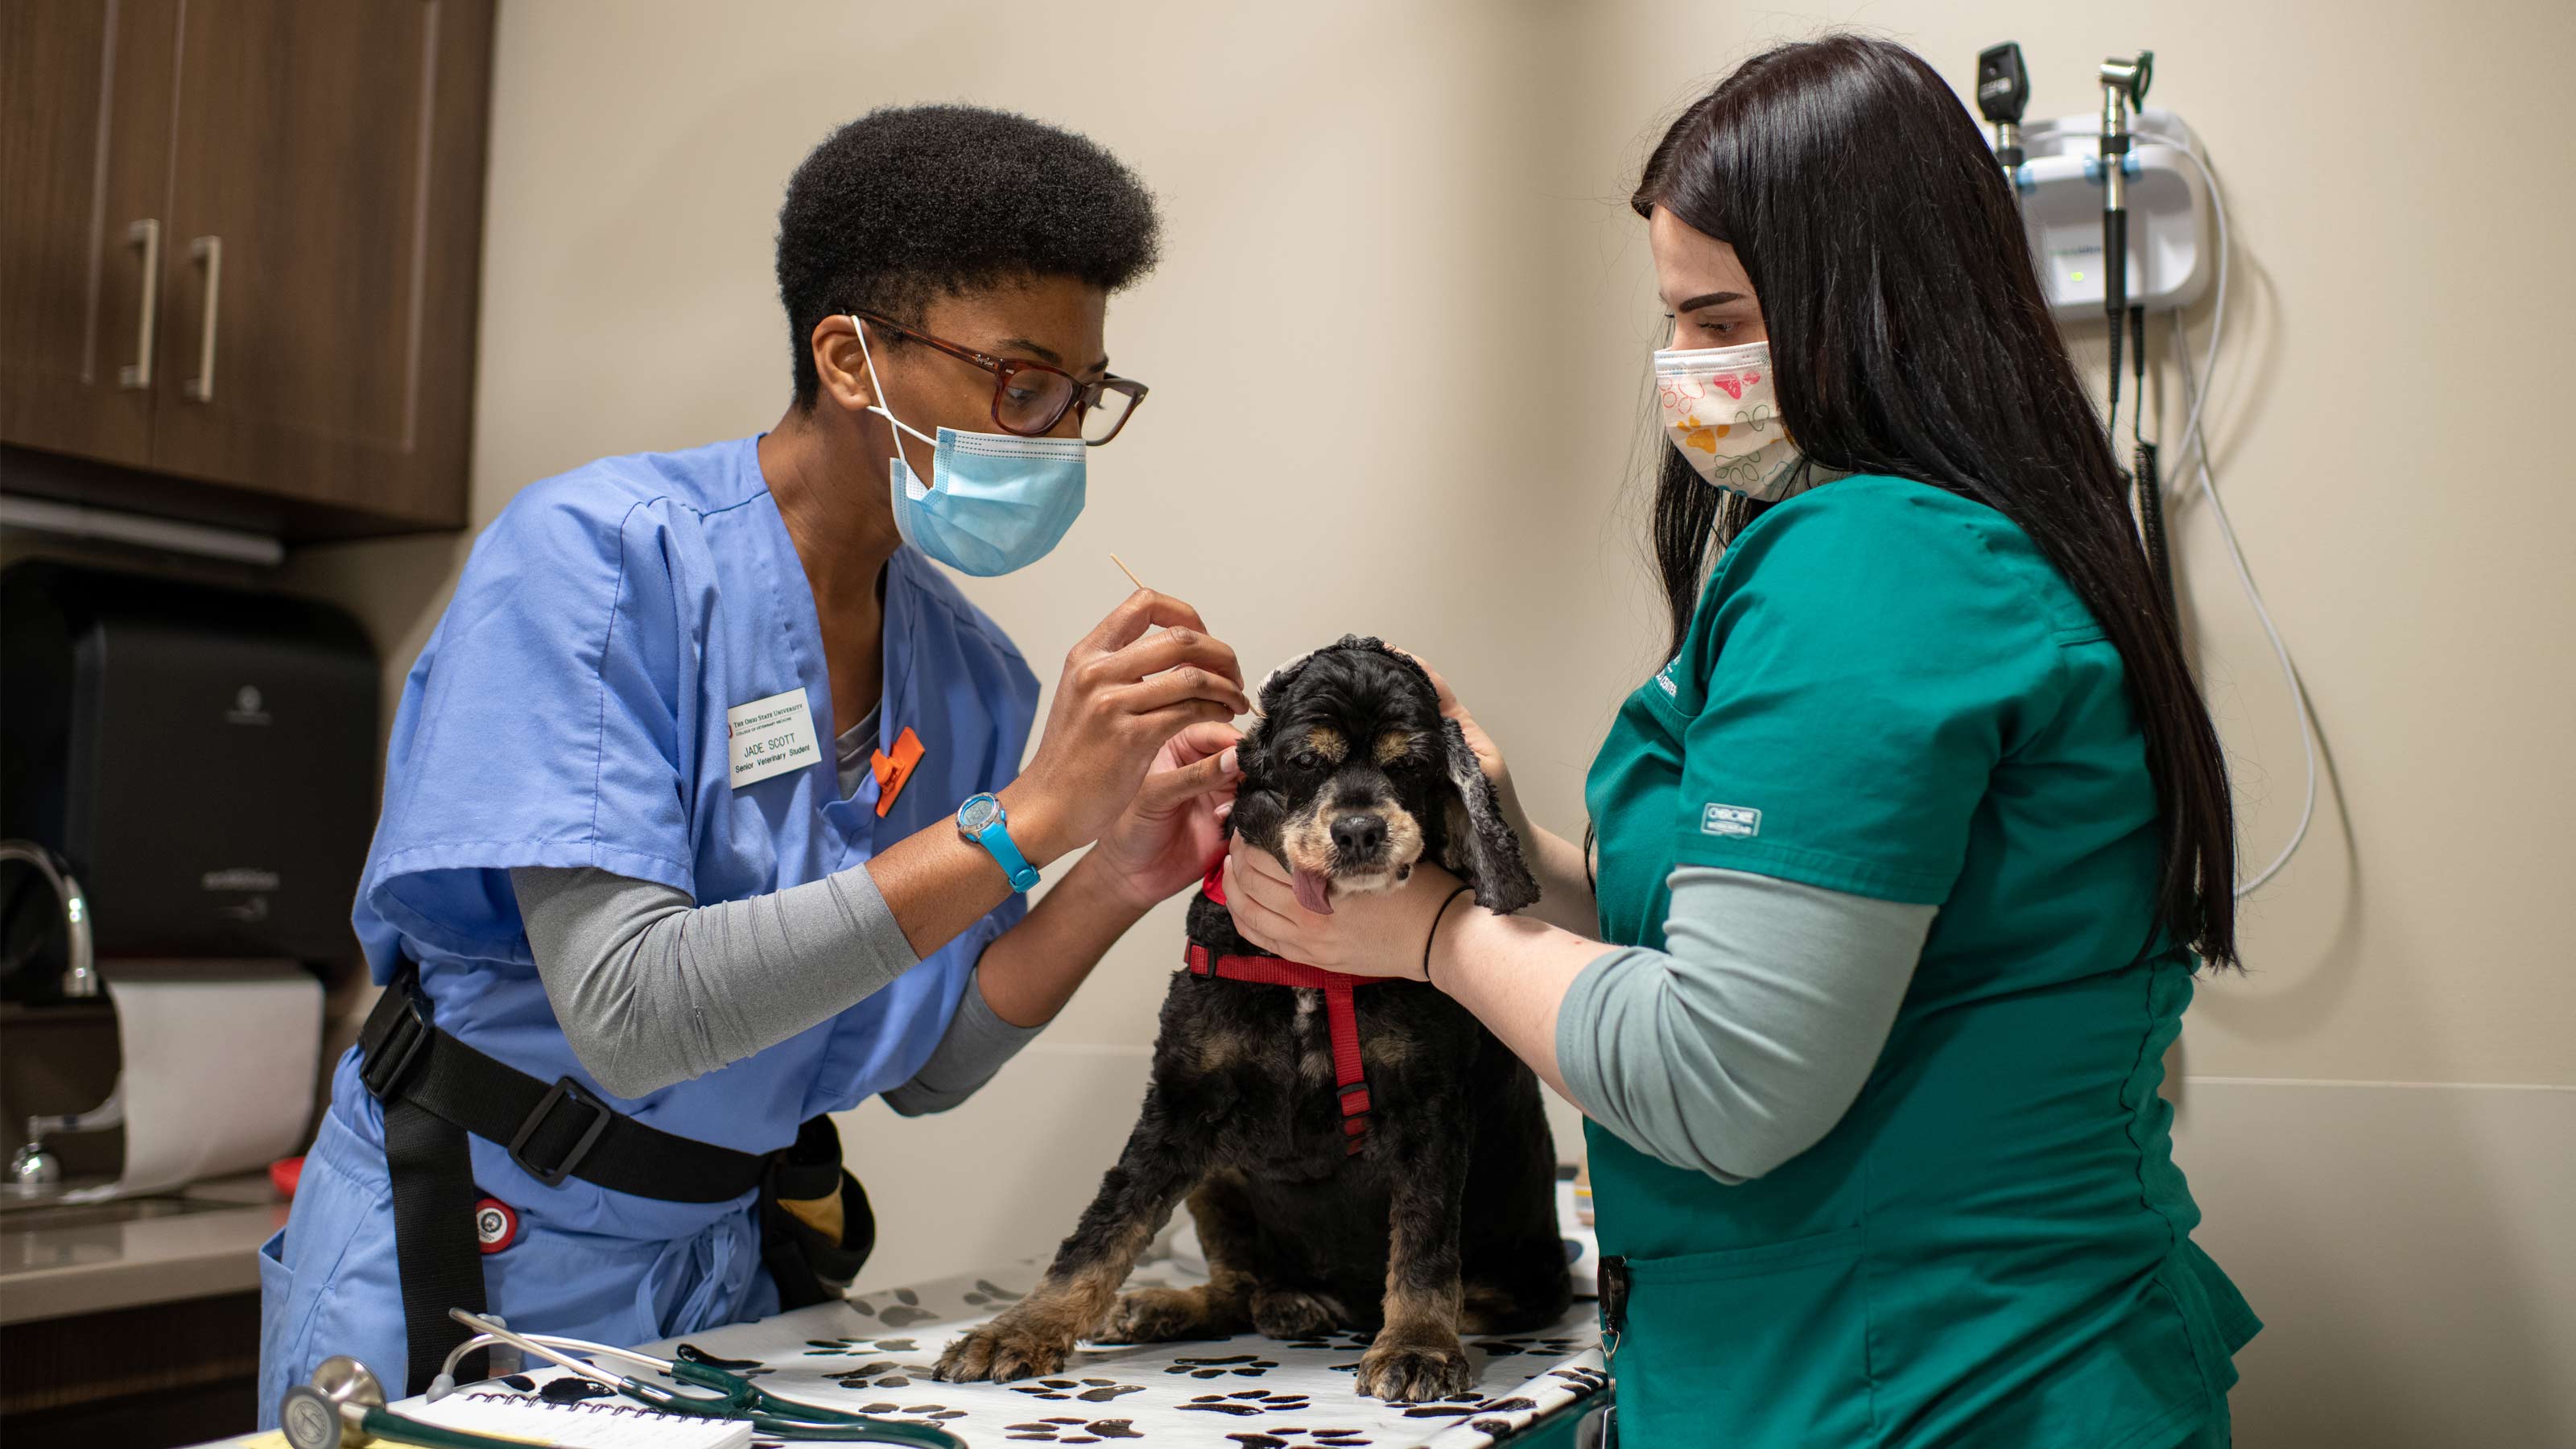 Two Ohio State veterinary students examining a small dog in a vet's office.